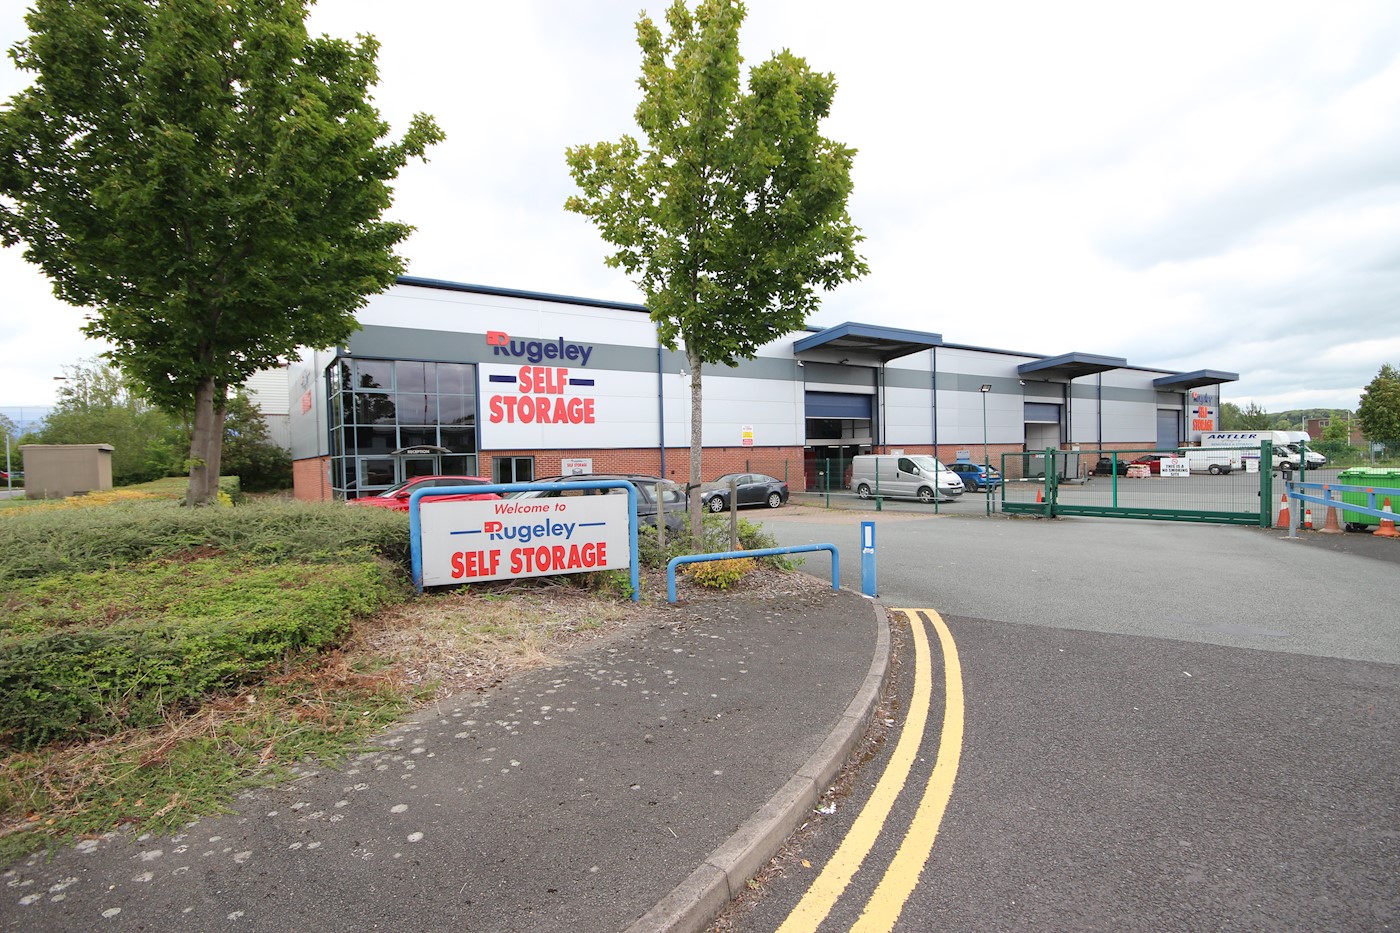 Long Leaseholds at Towers Business Park, Rugeley, WS15 1UZ 1/6